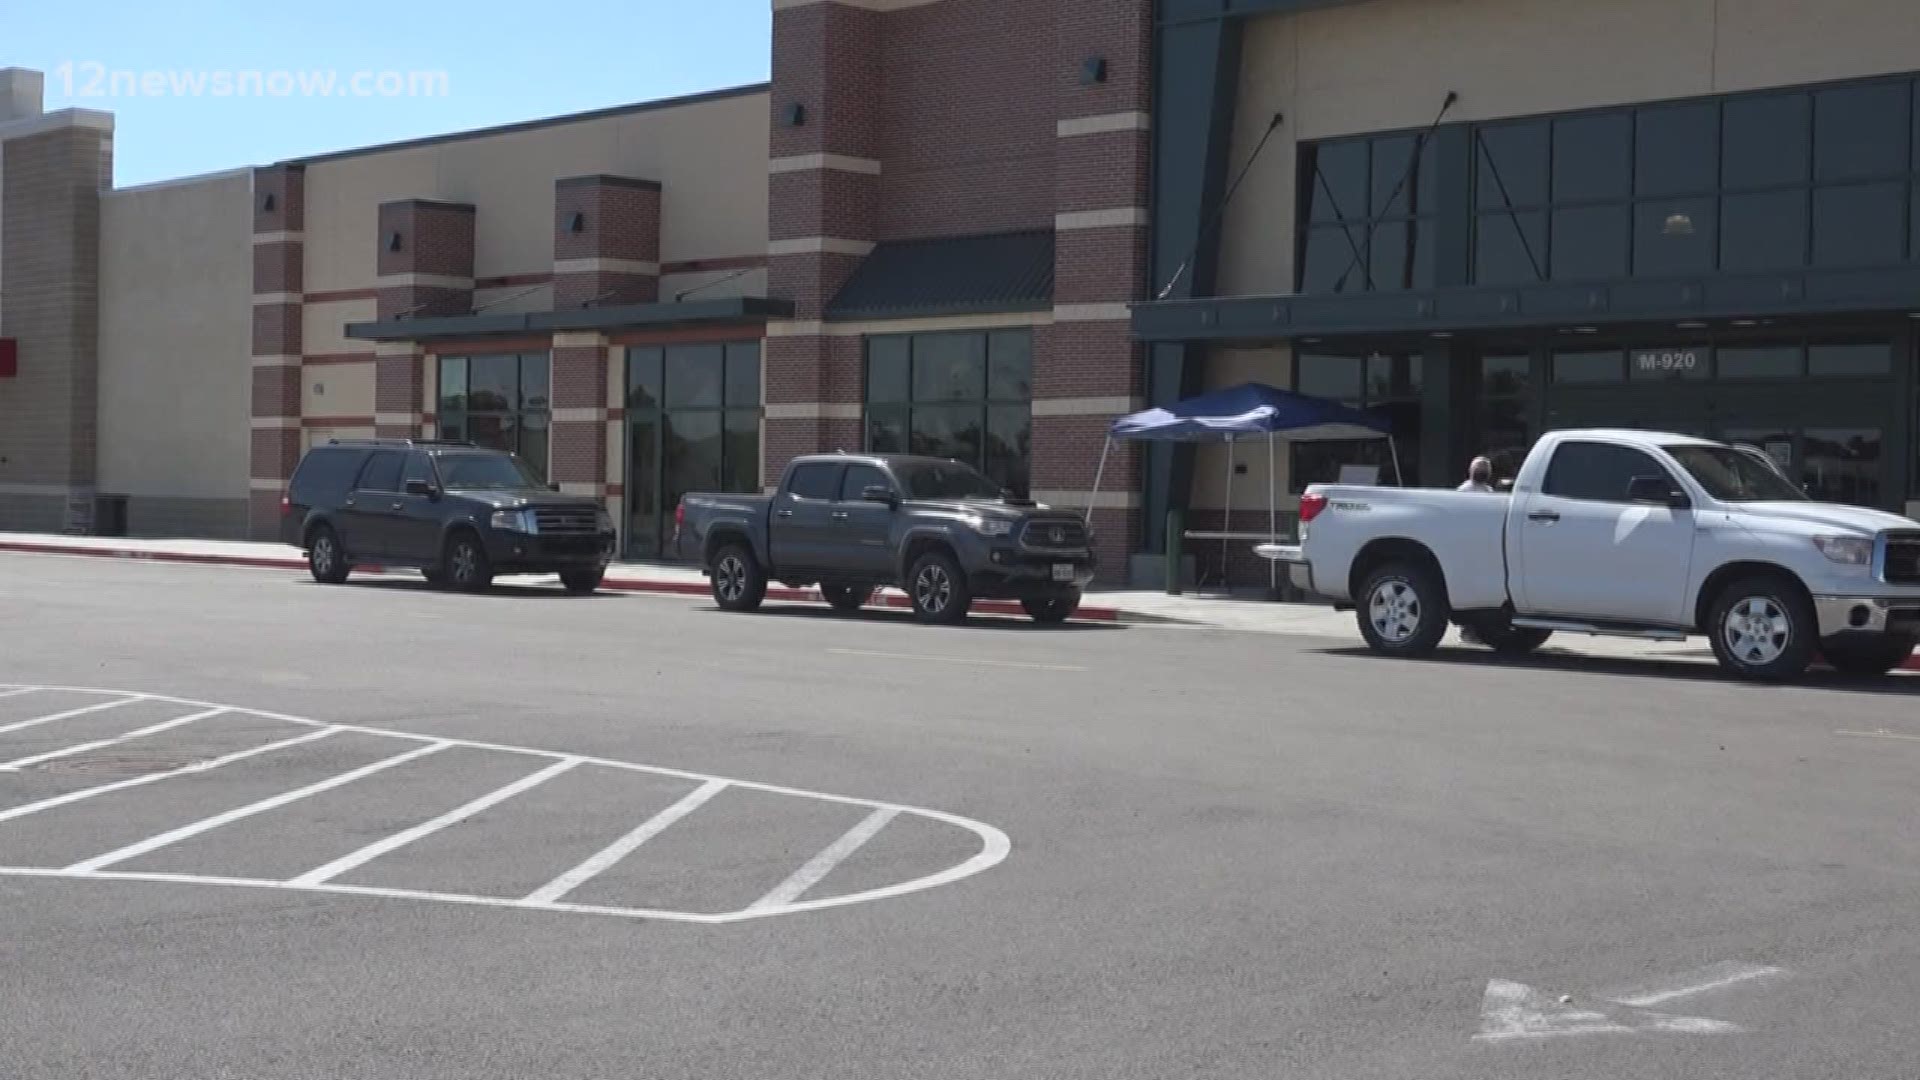 Texas malls open for curbside pick-up